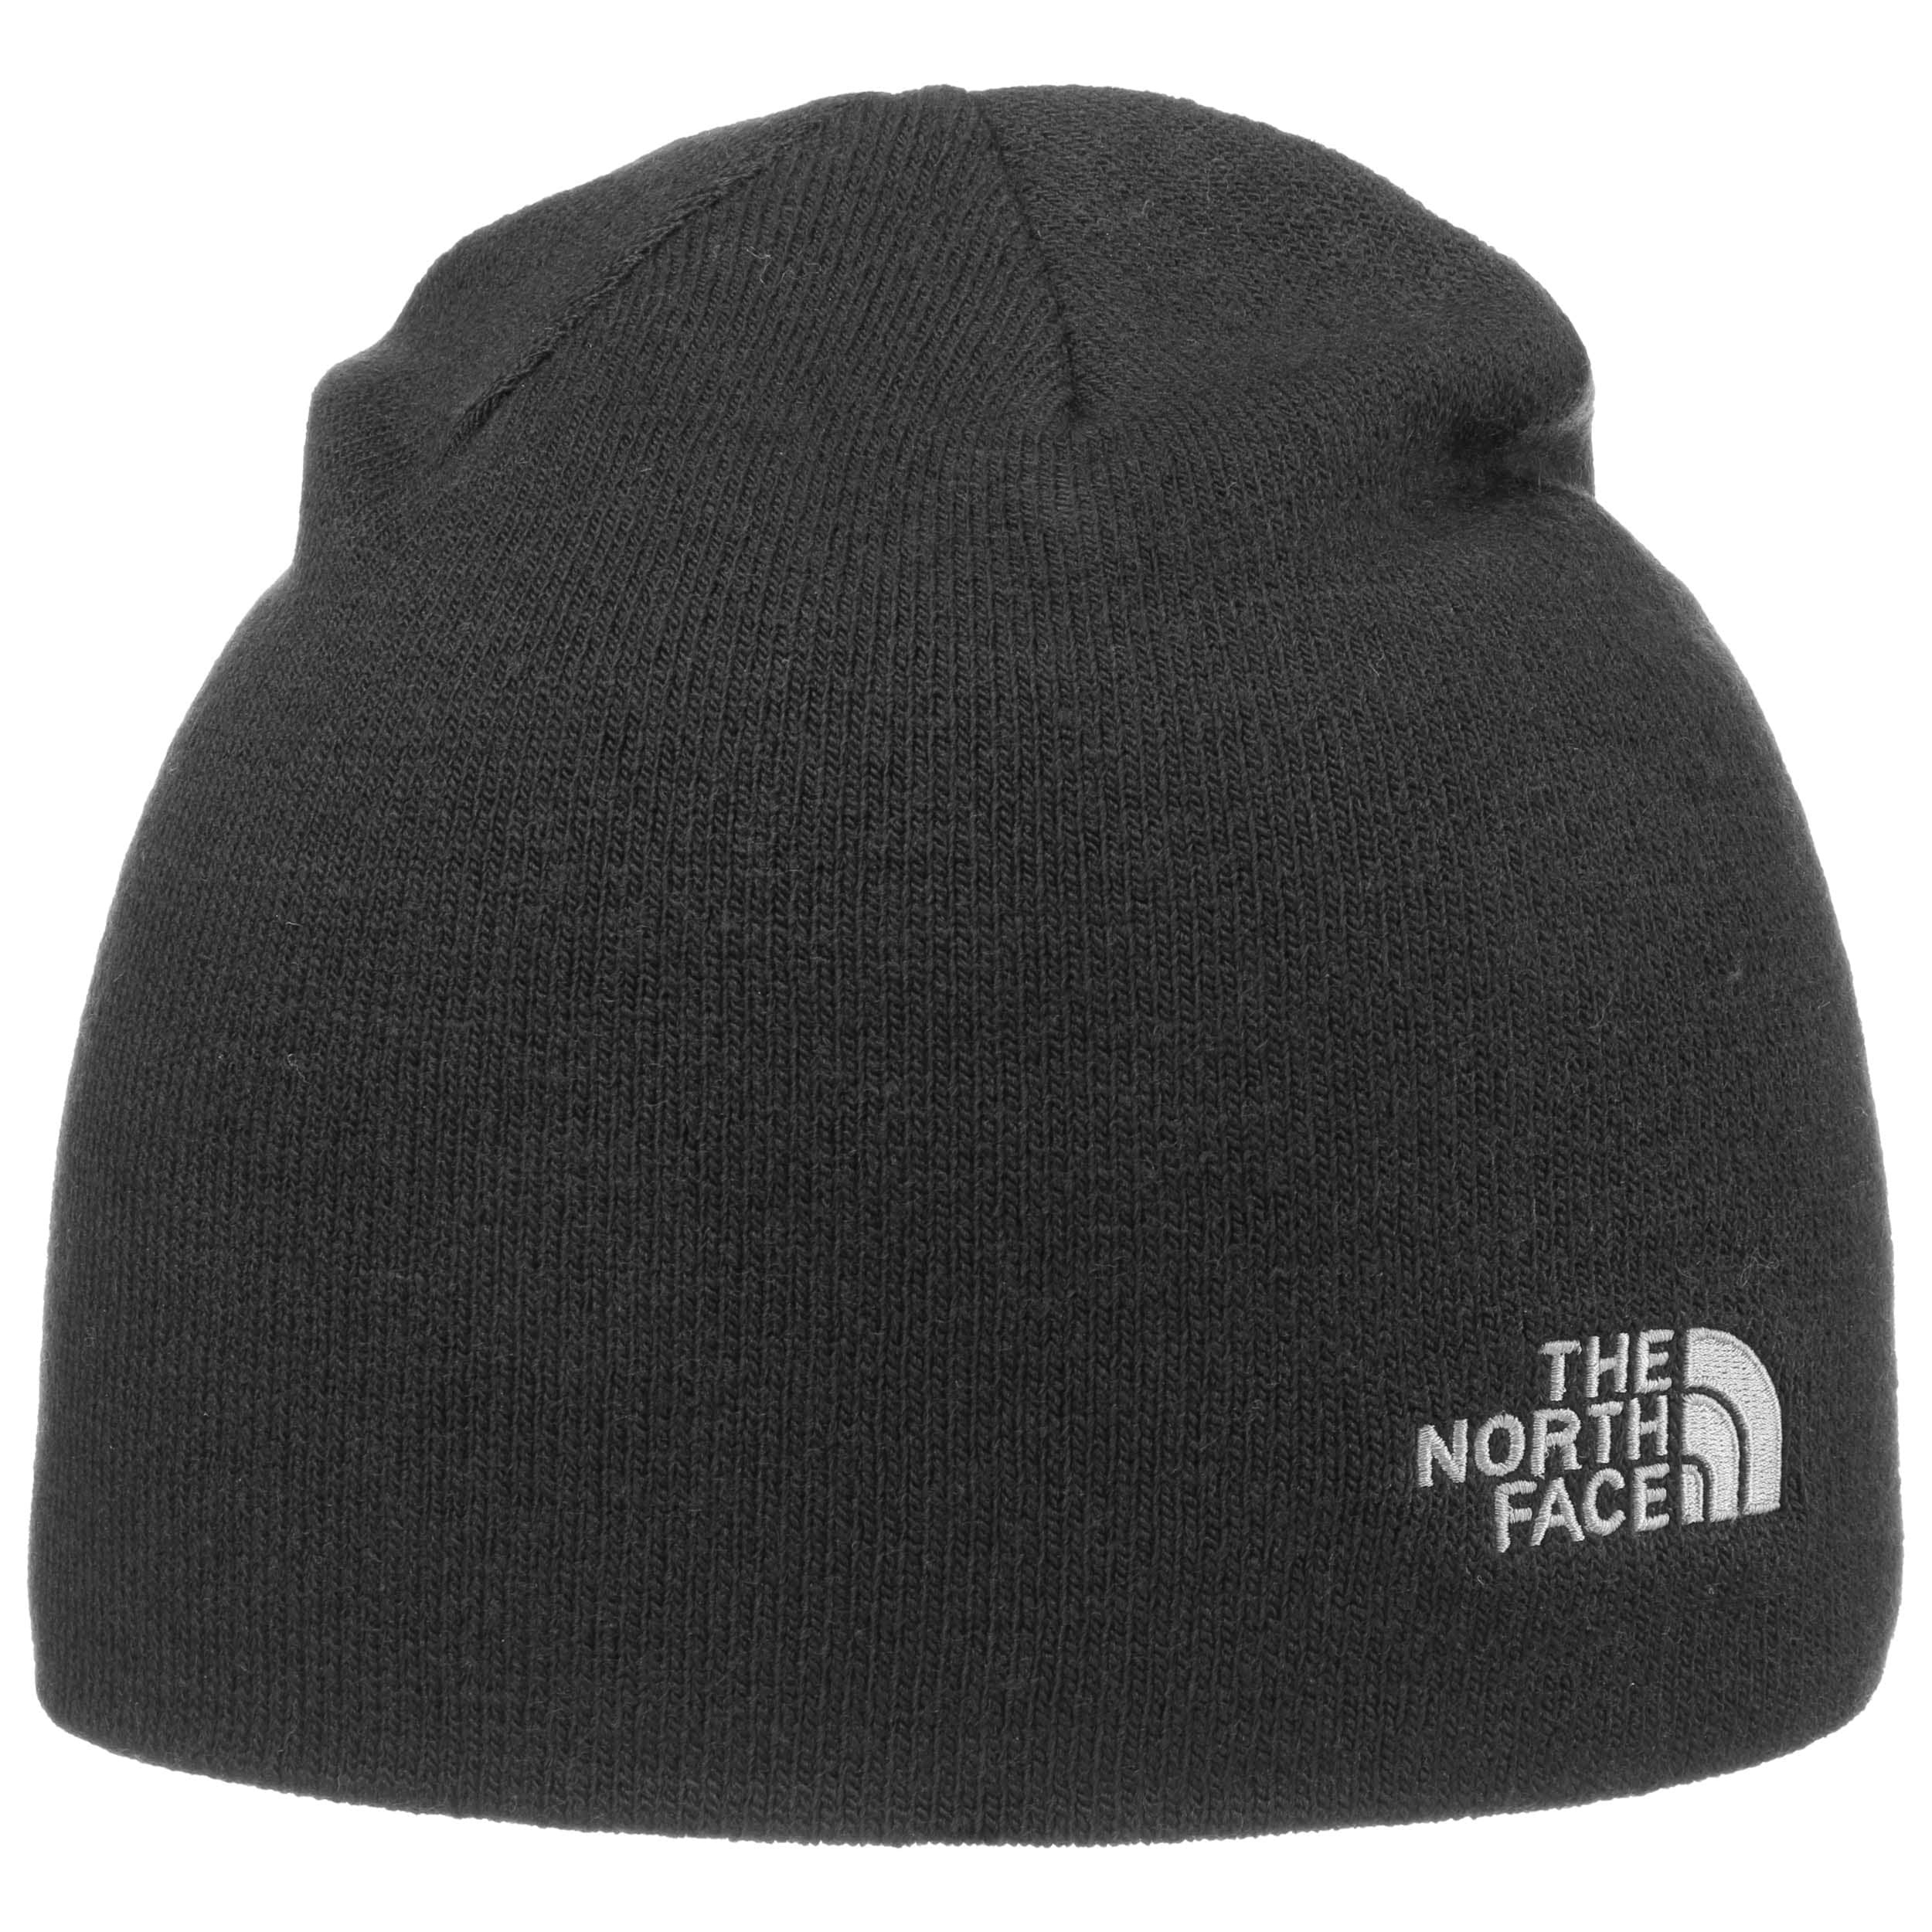 Pull On Beanie Hat by The North Face - 26,95